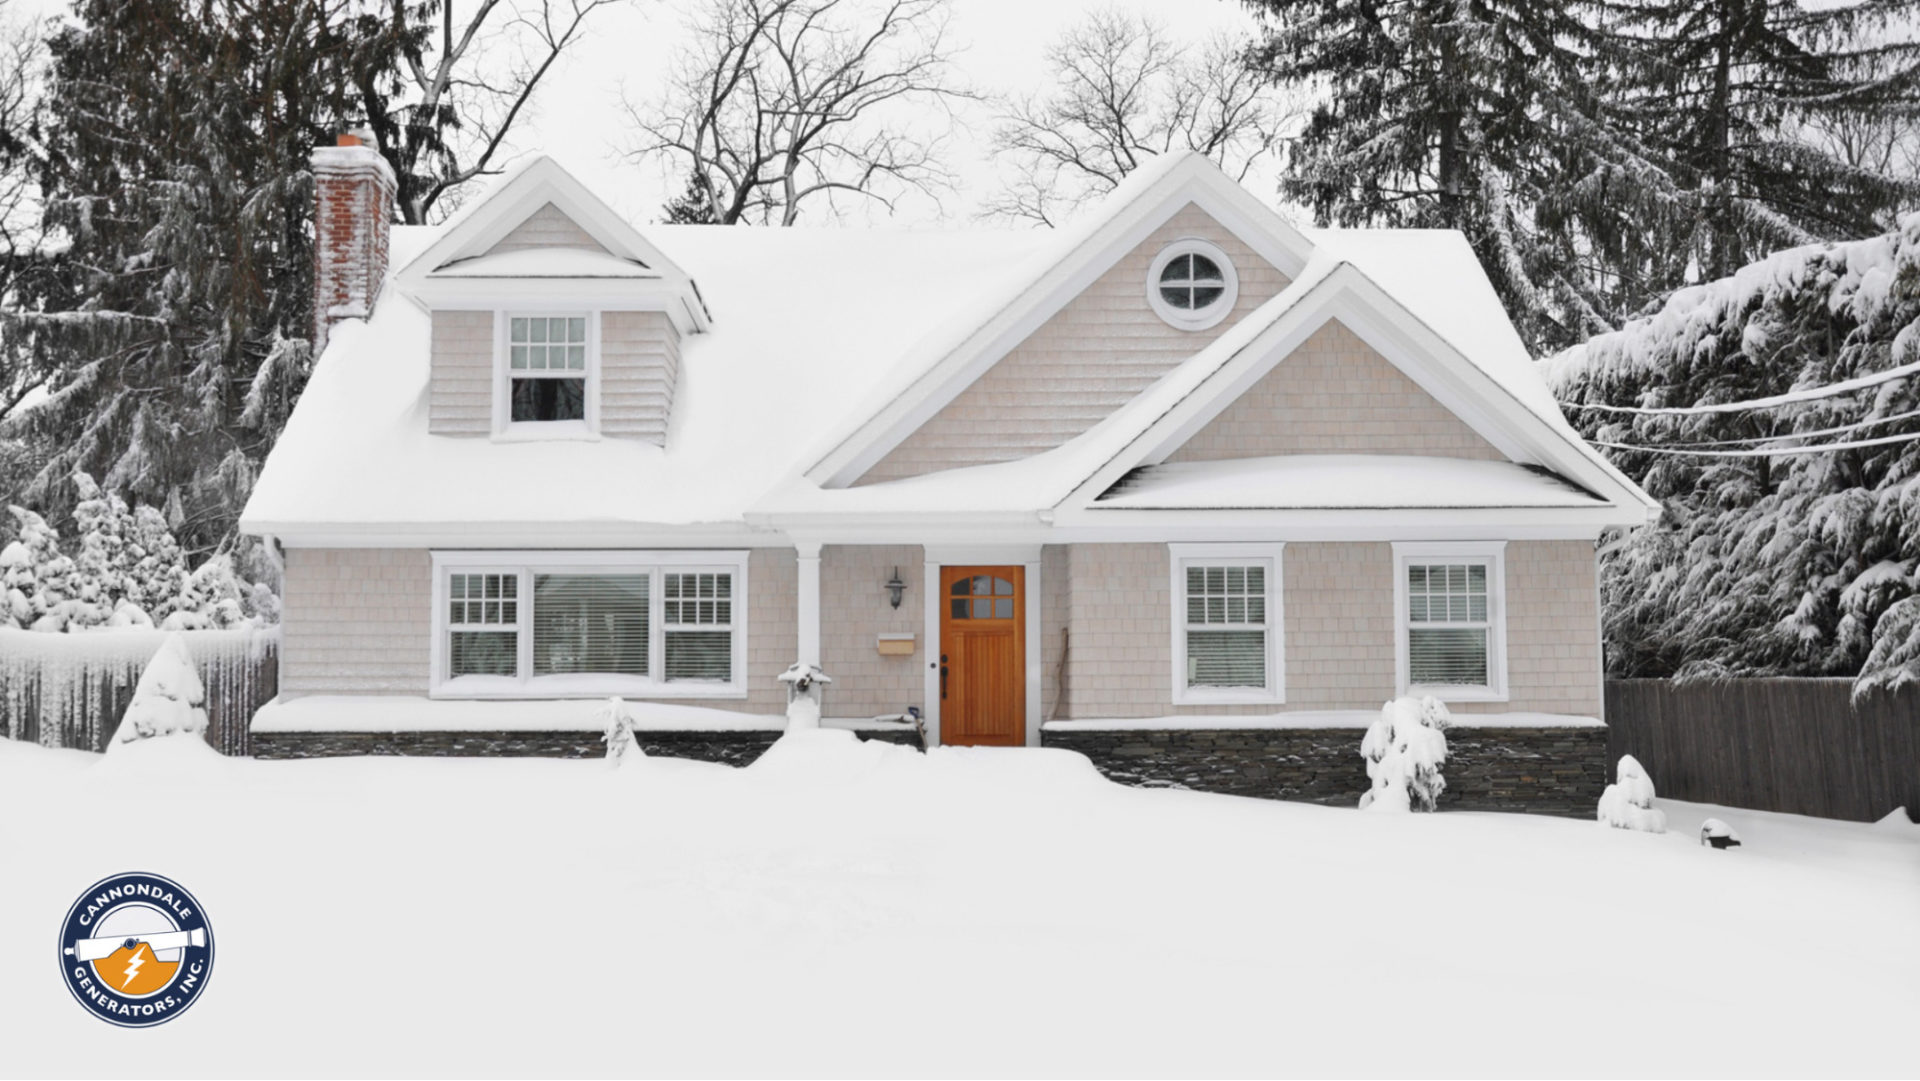 5 Tips To Prepare Your Home Standby Generator For The Winter